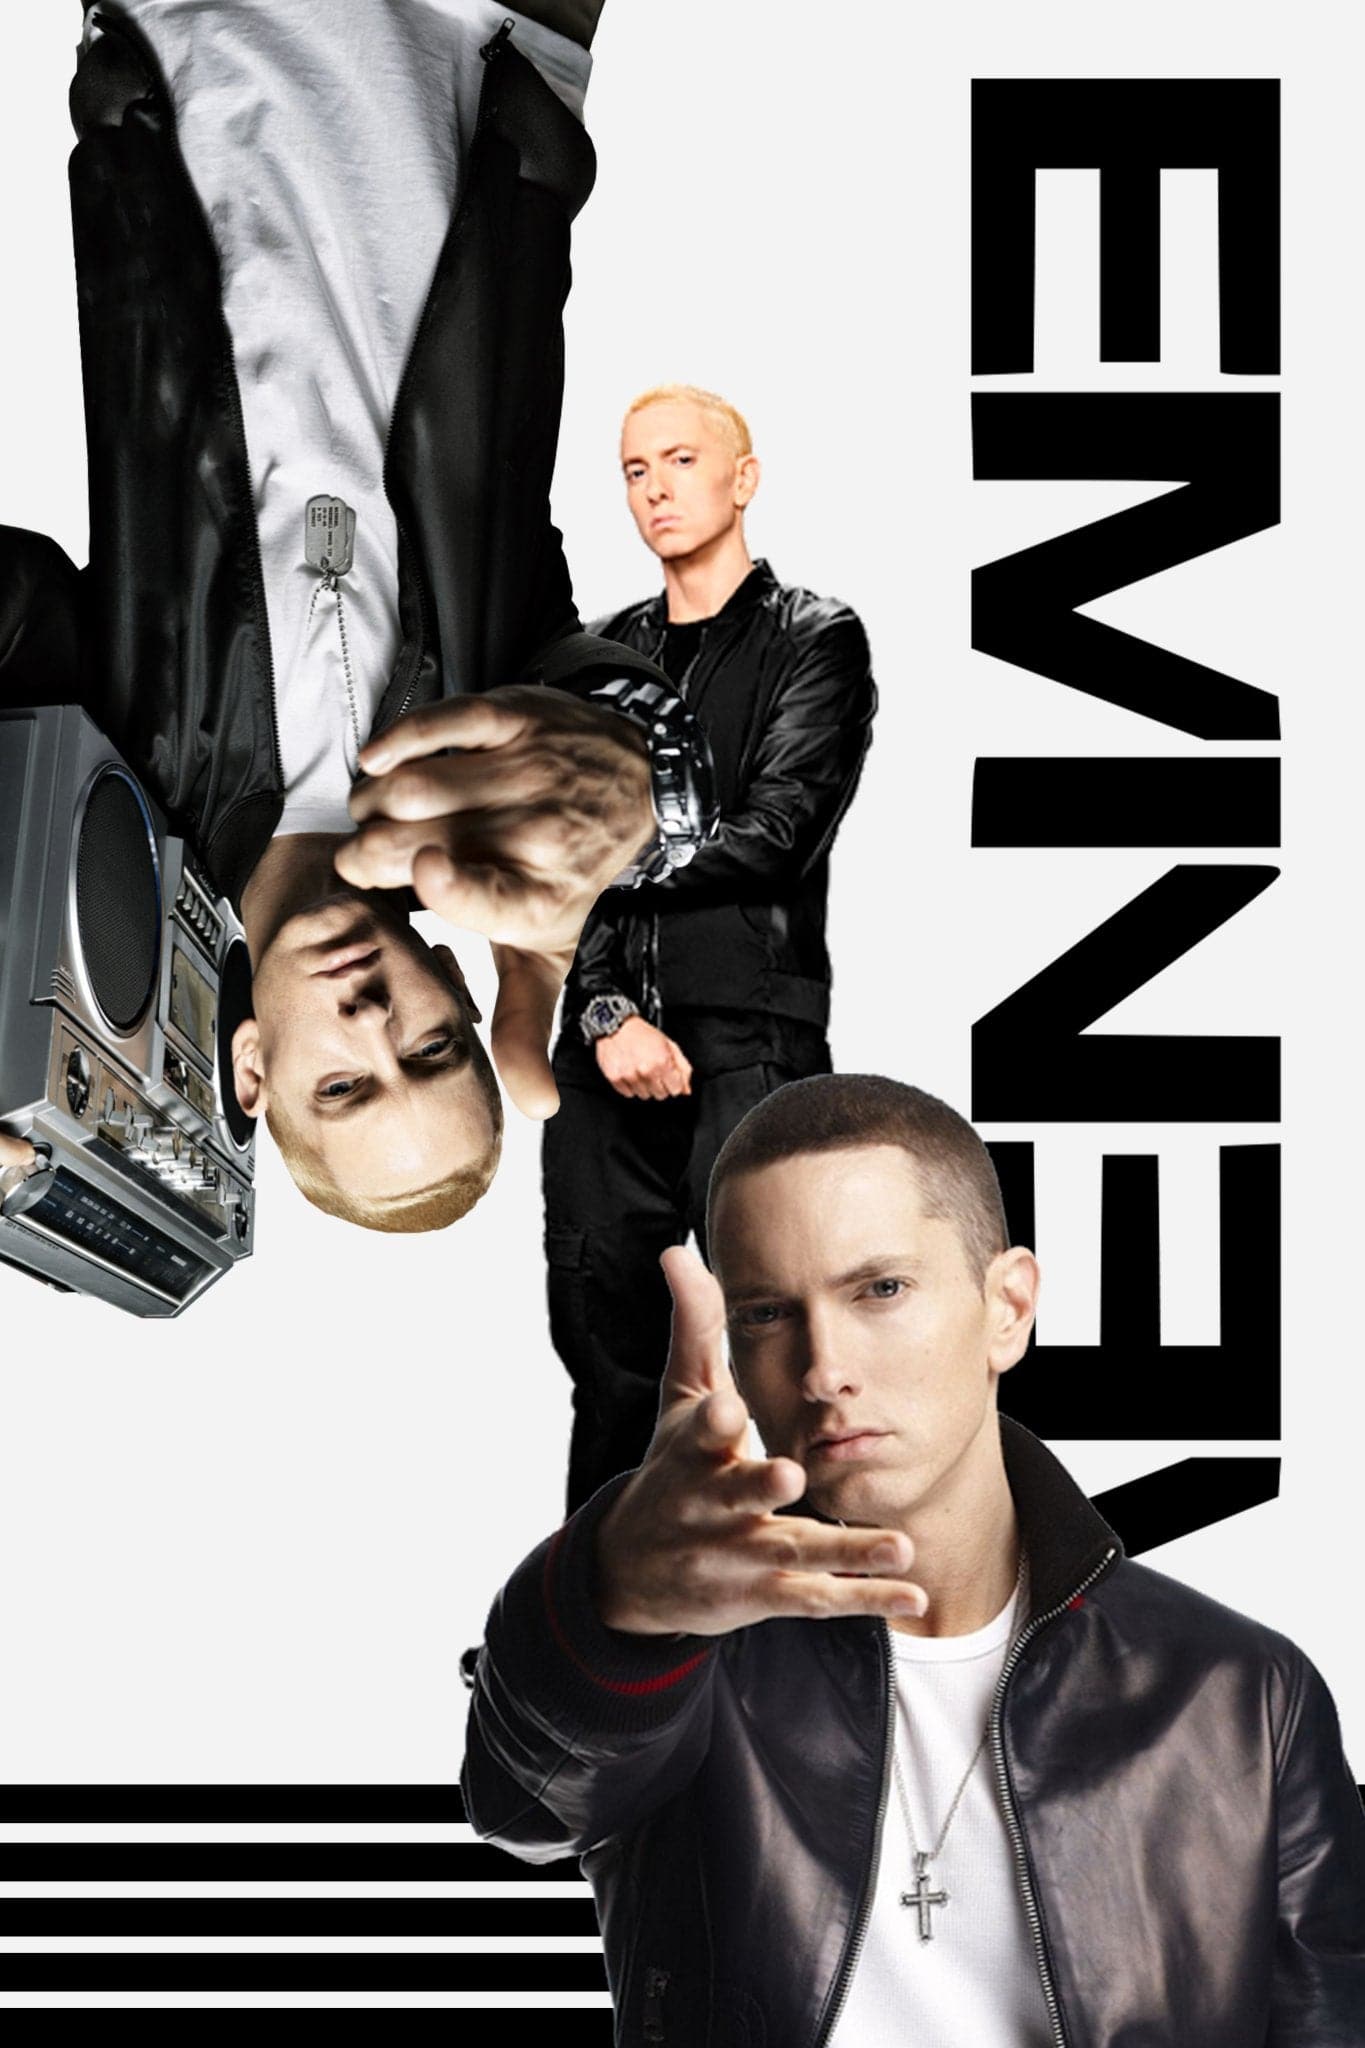 Eminem Poster - High-Quality Print, Multiple Sizes, Fast Shipping